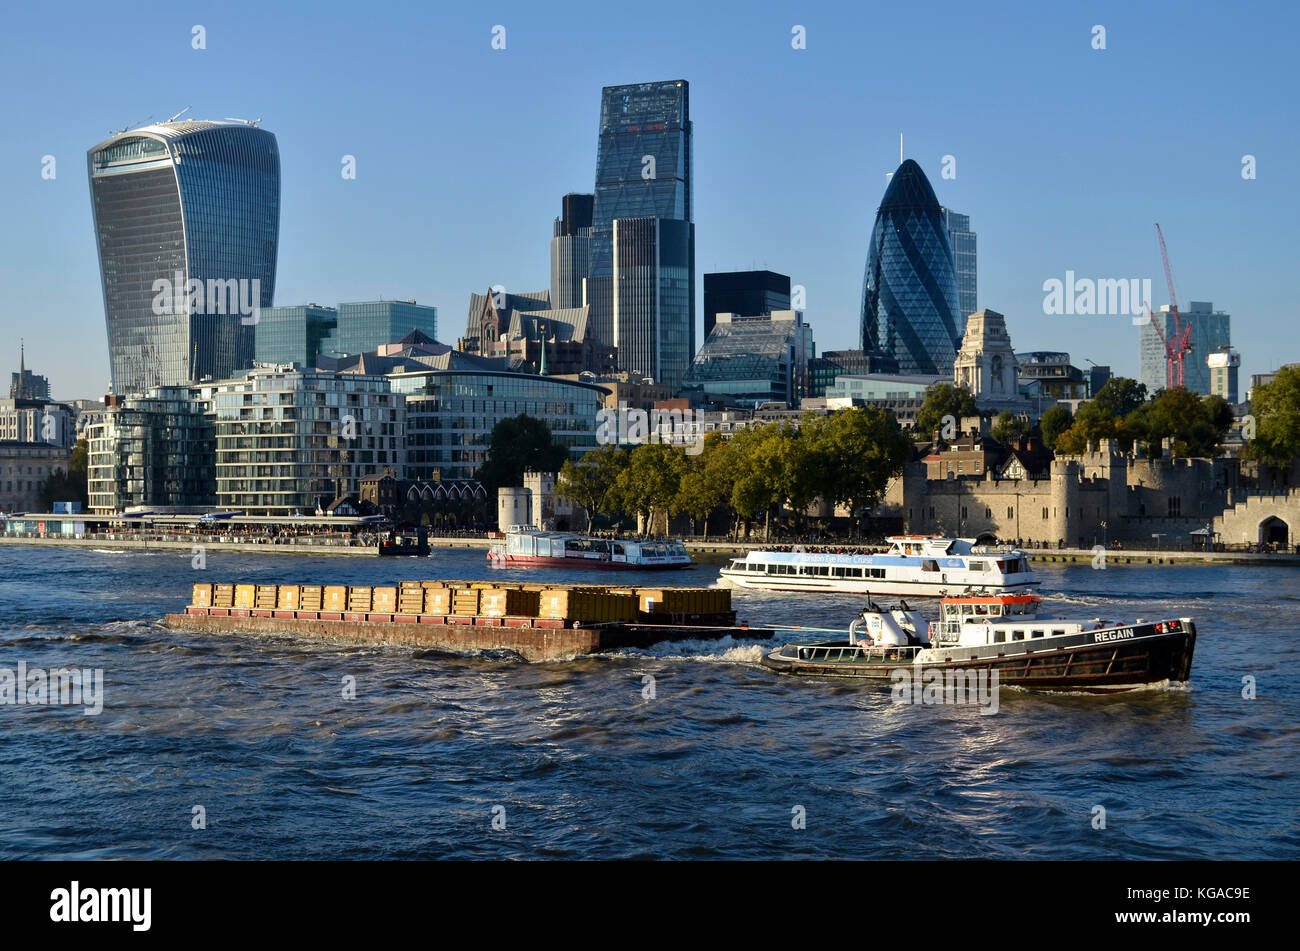 Cory Envirnomental container barge being pulled by tug boat Regain River Thames, London, UK, with London financial district behind. Stock Photo